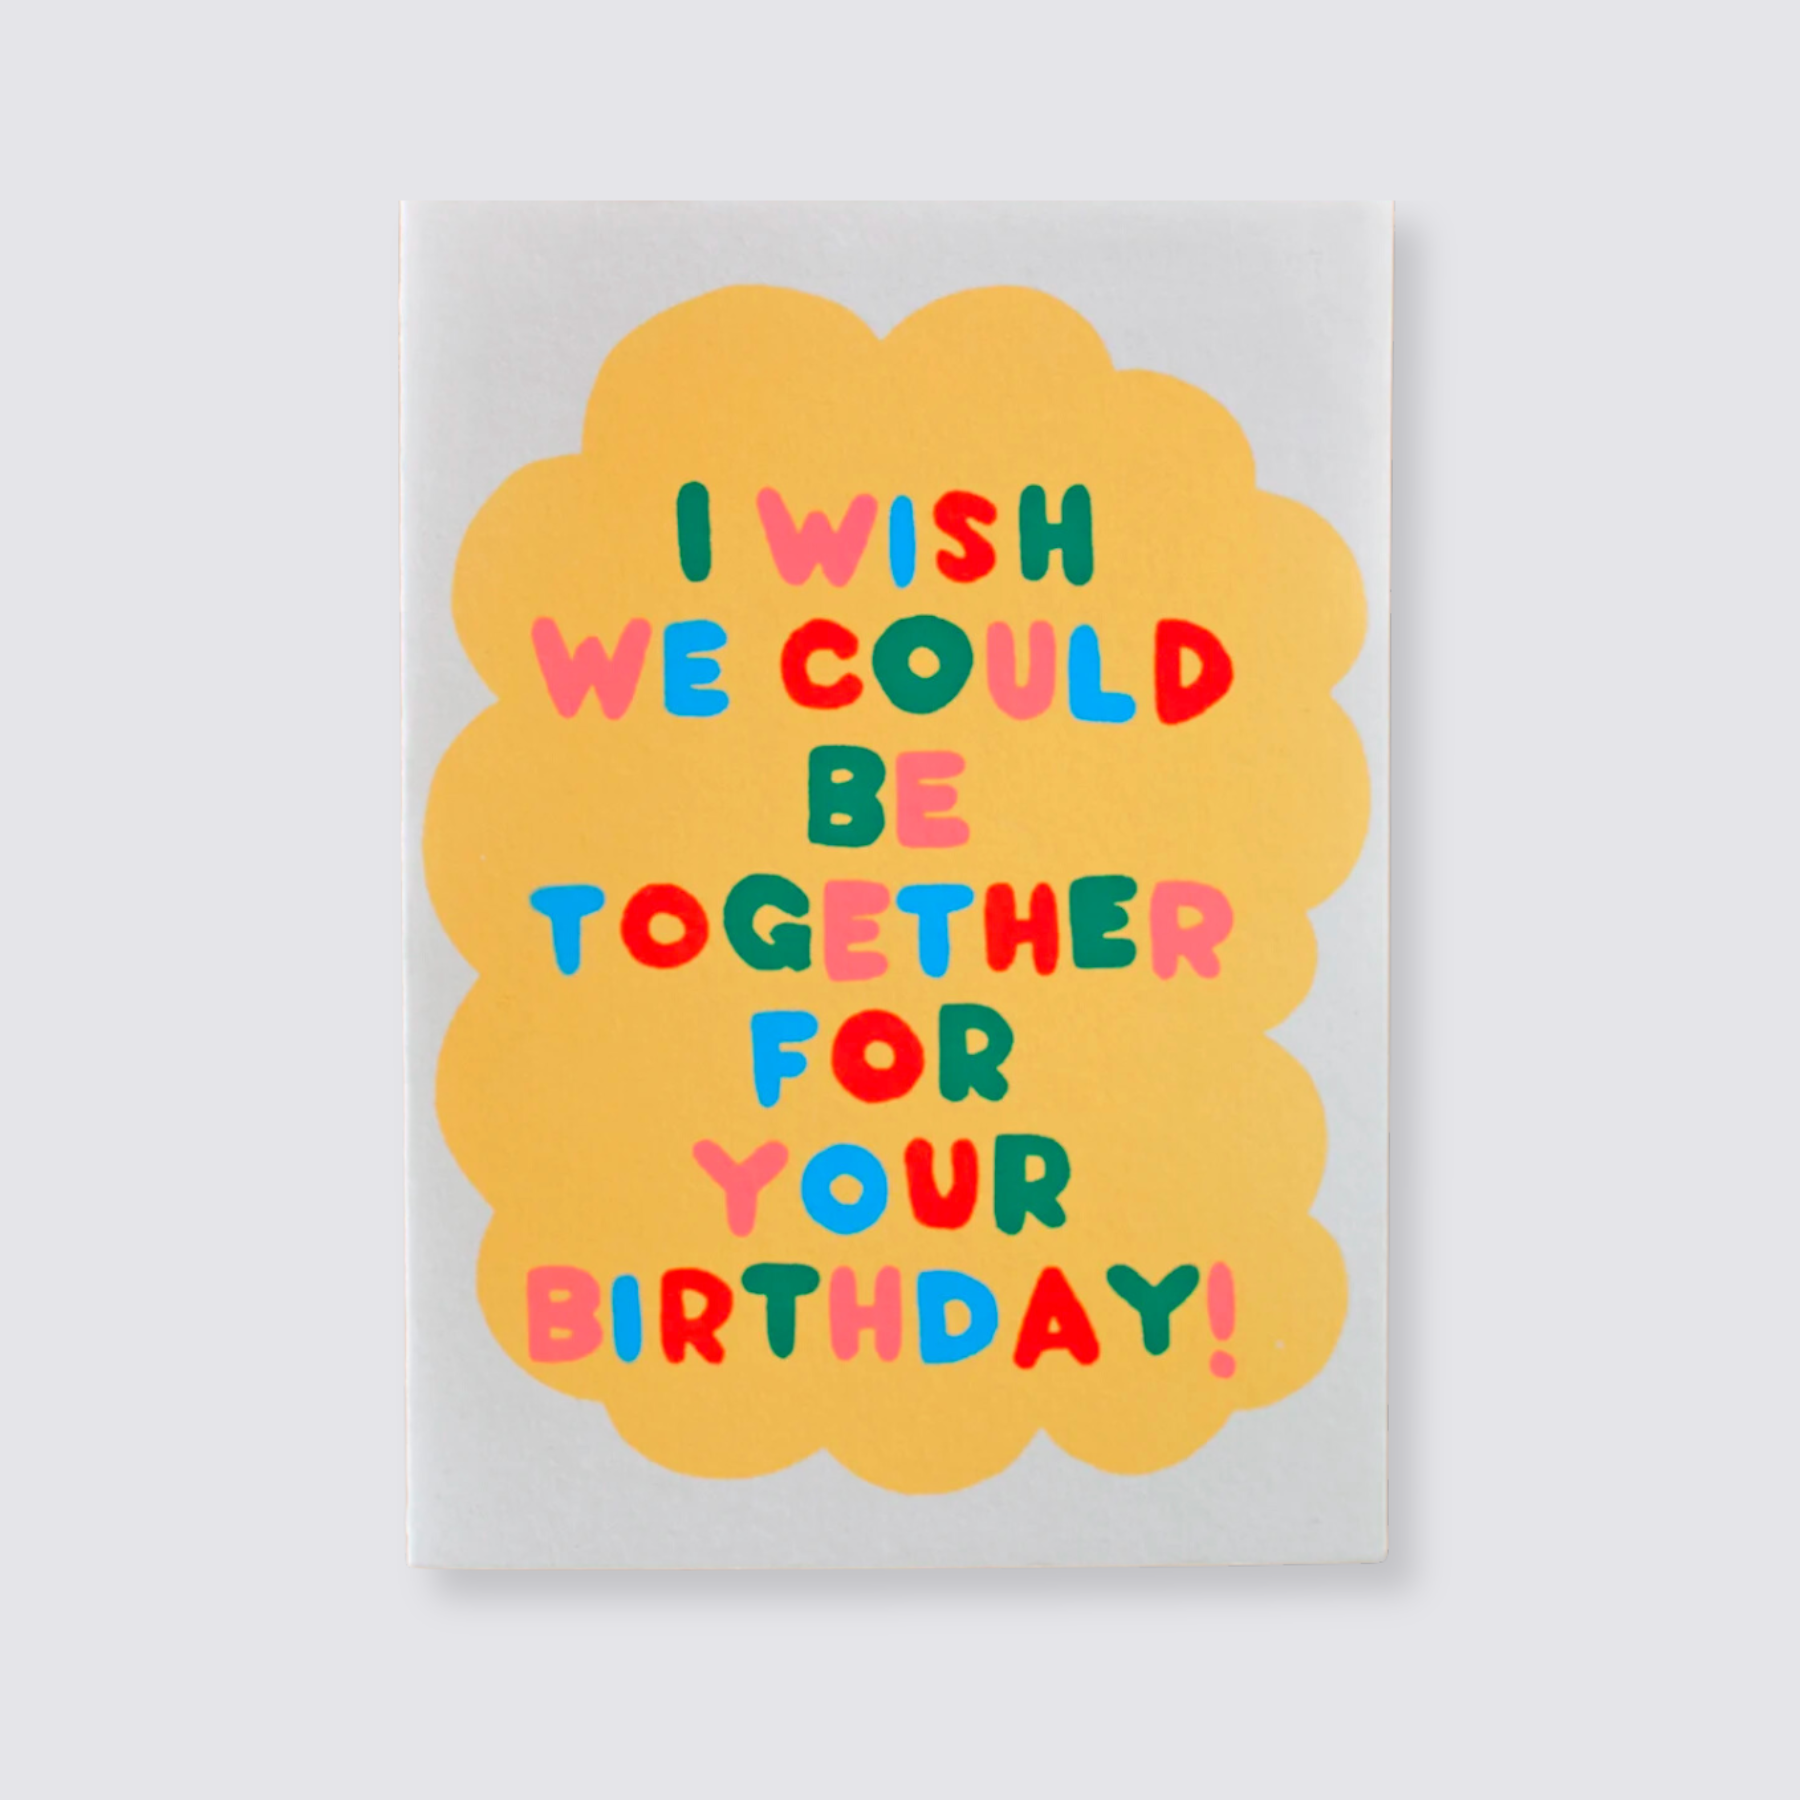 Be together birthday wish card